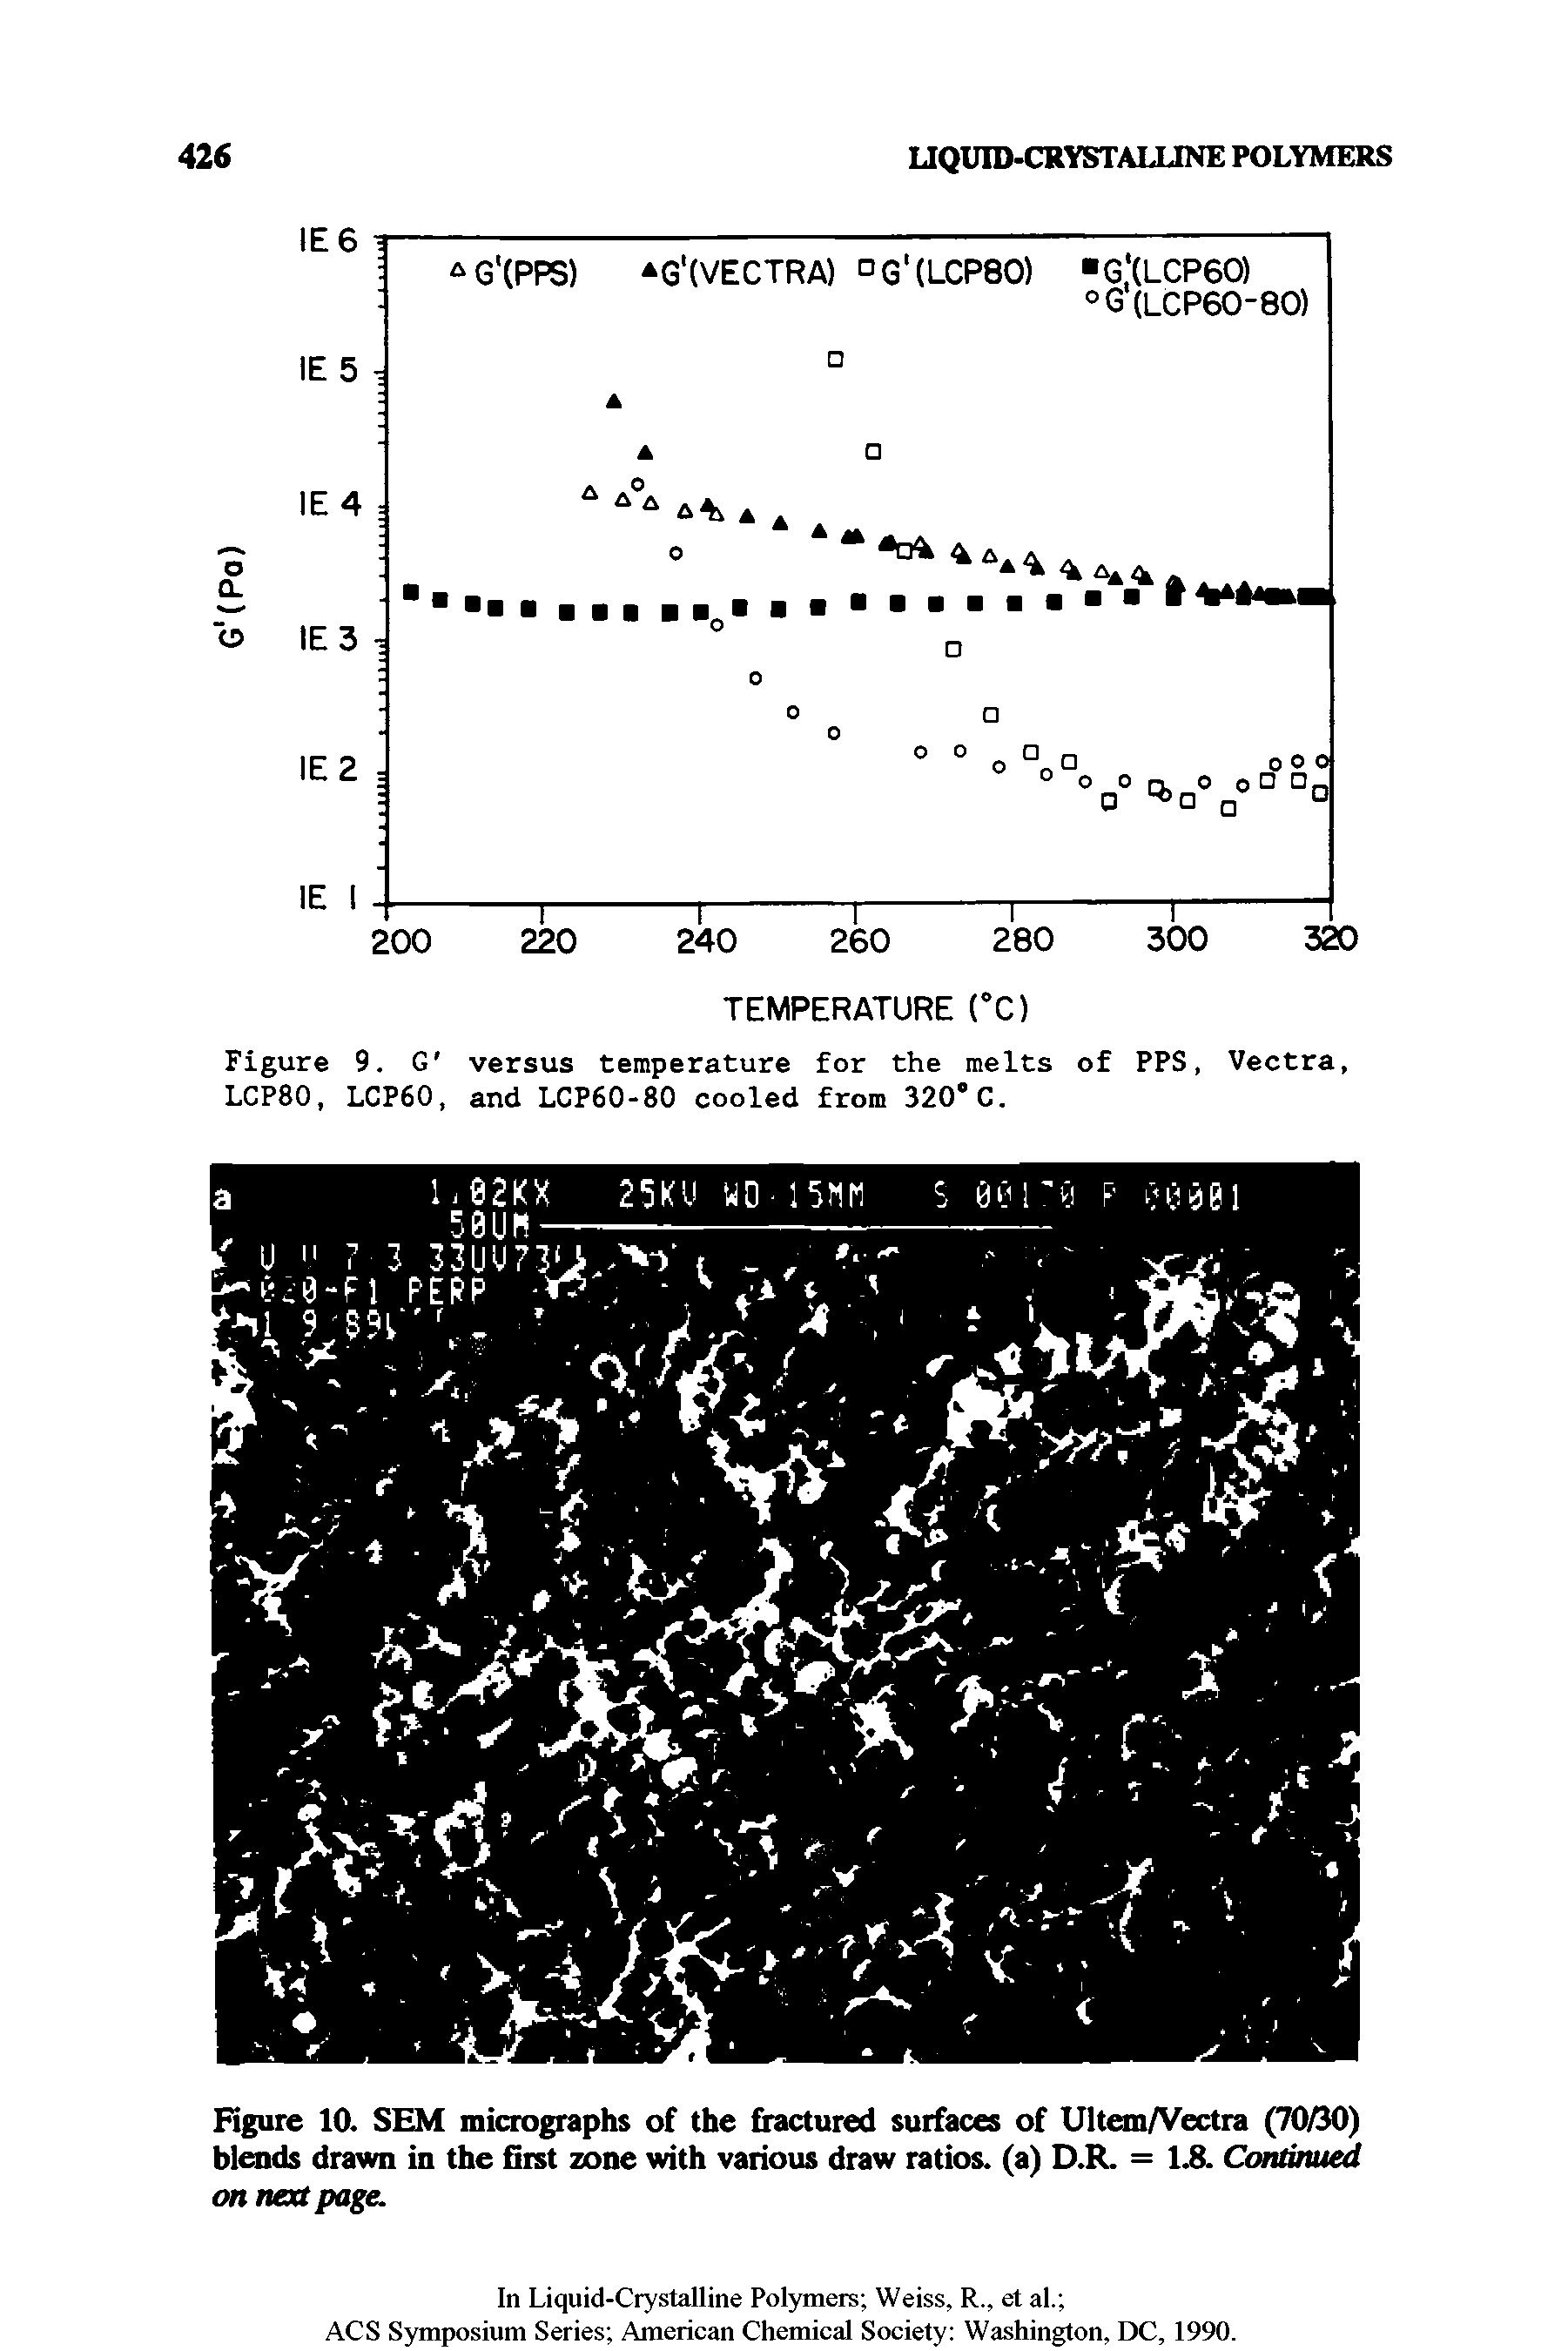 Figure 10. SEM micrographs of the fractured surfaces of Ultem/Vectra (70/30) blends drawn in the Gist zone with various draw ratios, (a) D.R. = 1.8. Continued on next page.